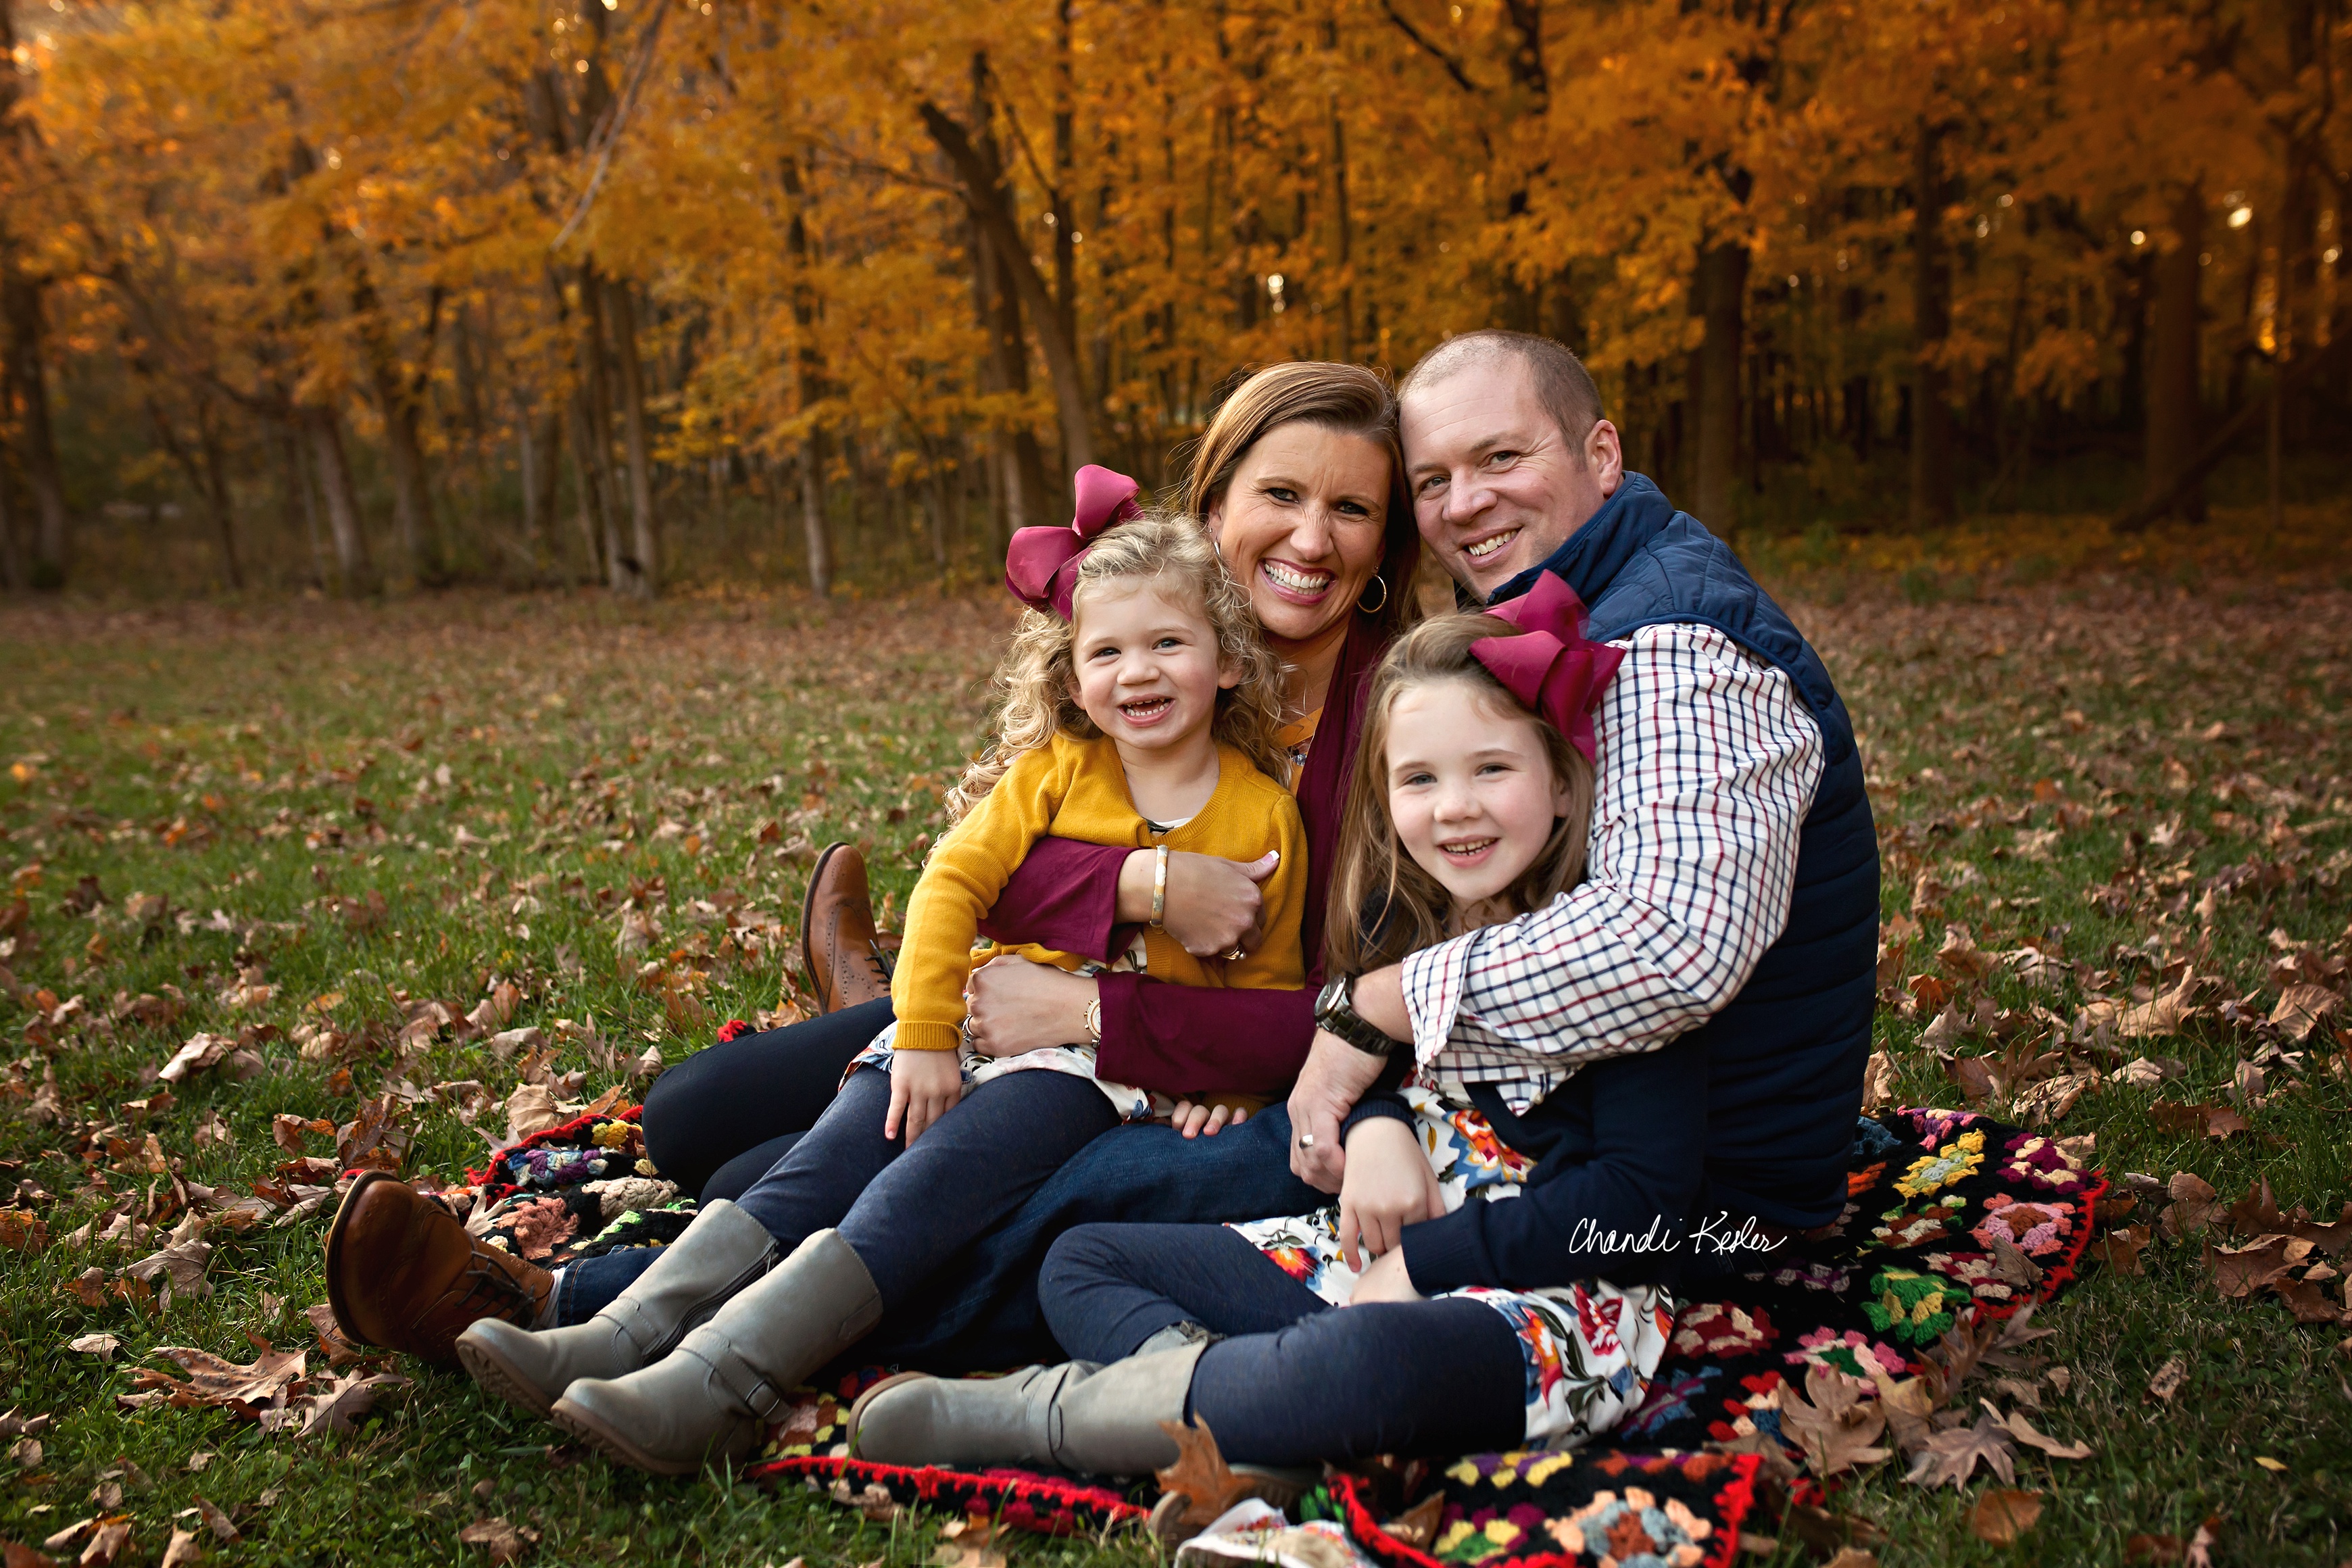 Peoria IL Family Photographer | Chandi Kesler Photography | Fall Pictures Bloomington IL